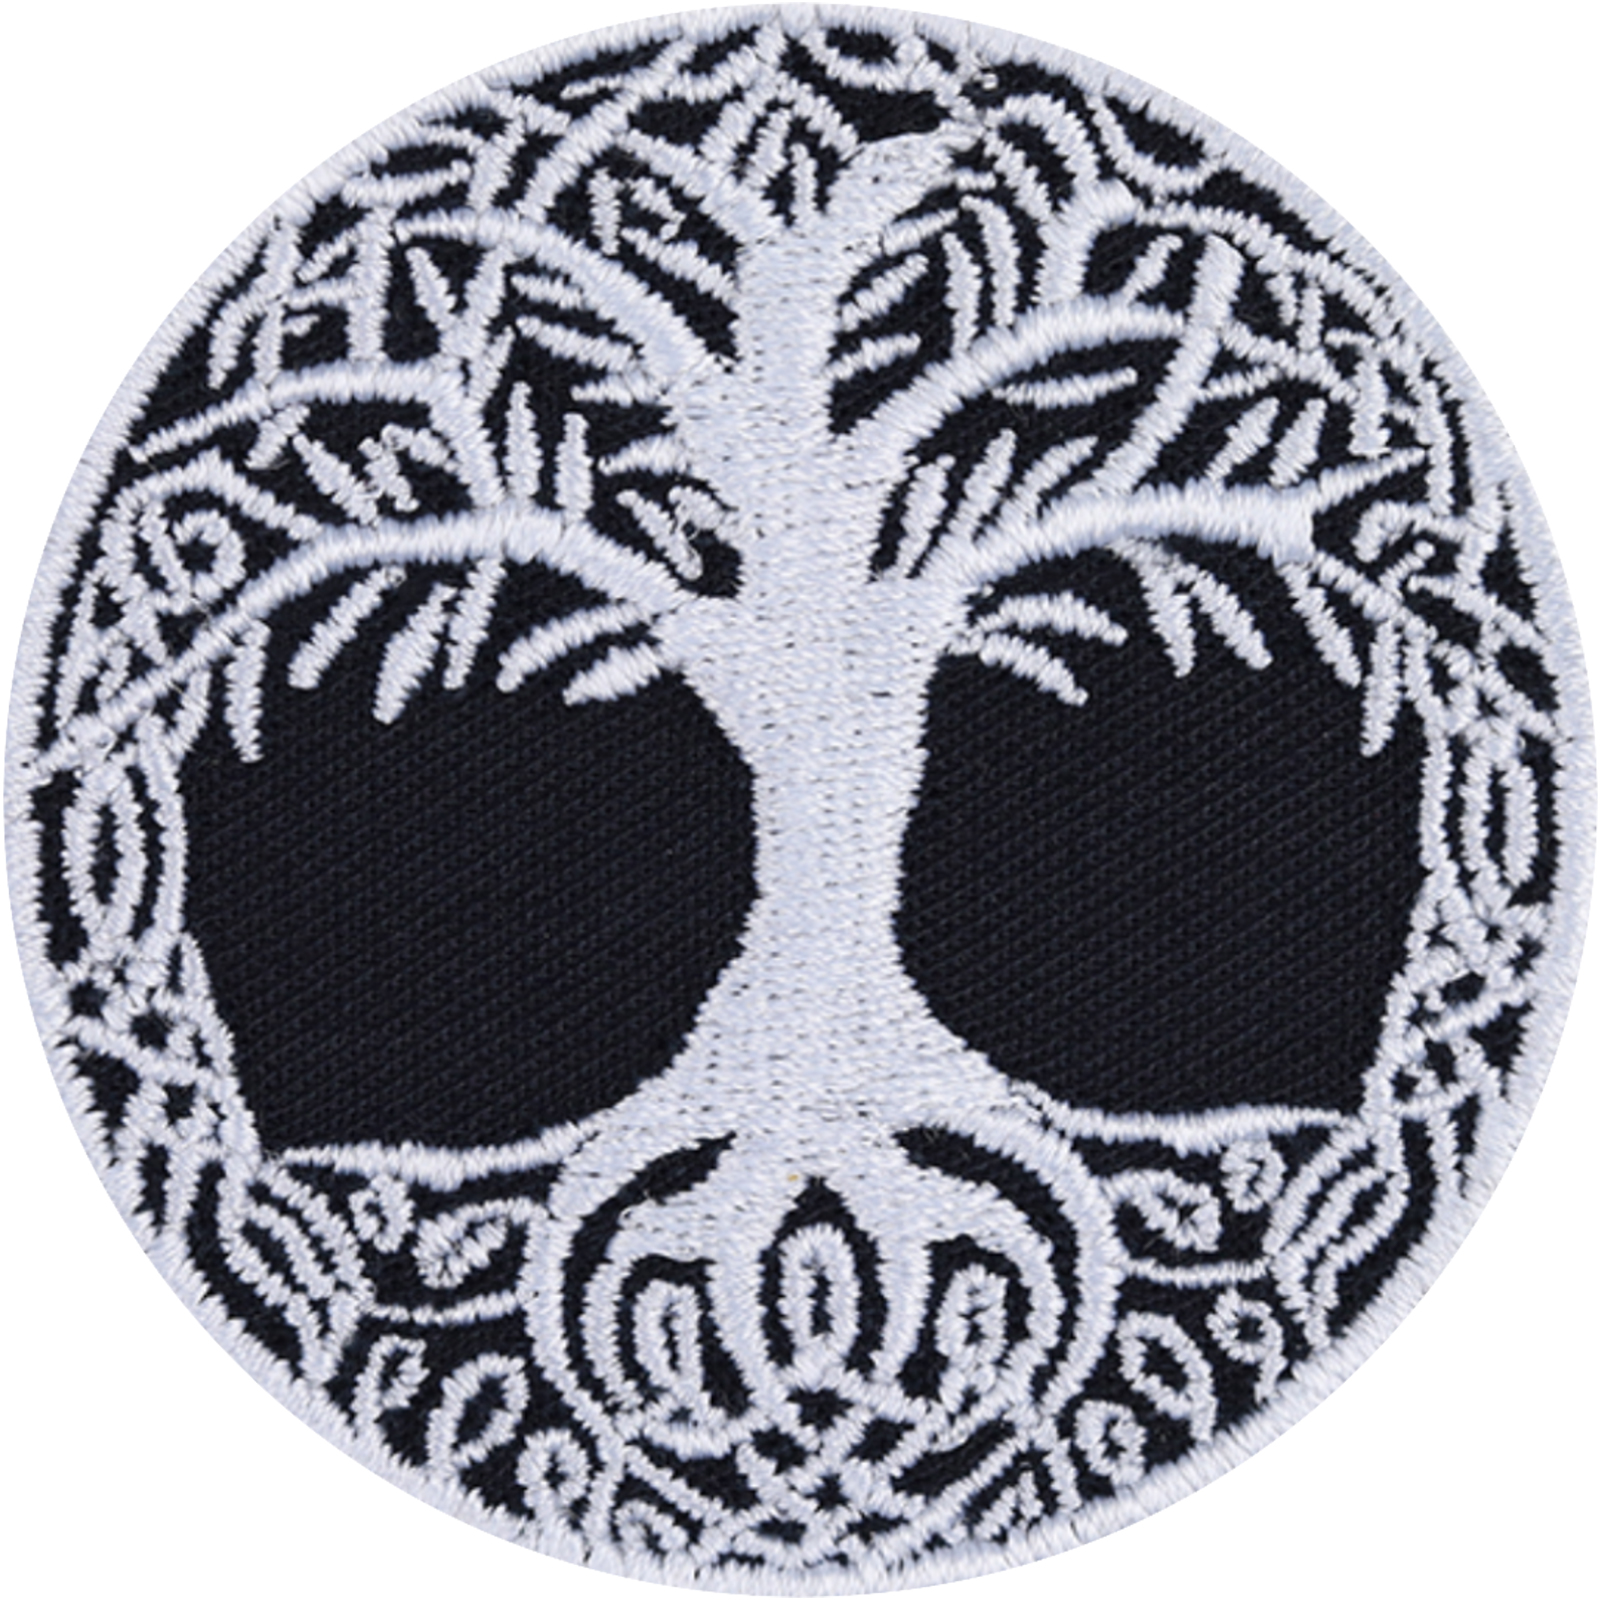 Yggdrasil -tree of life - Patch